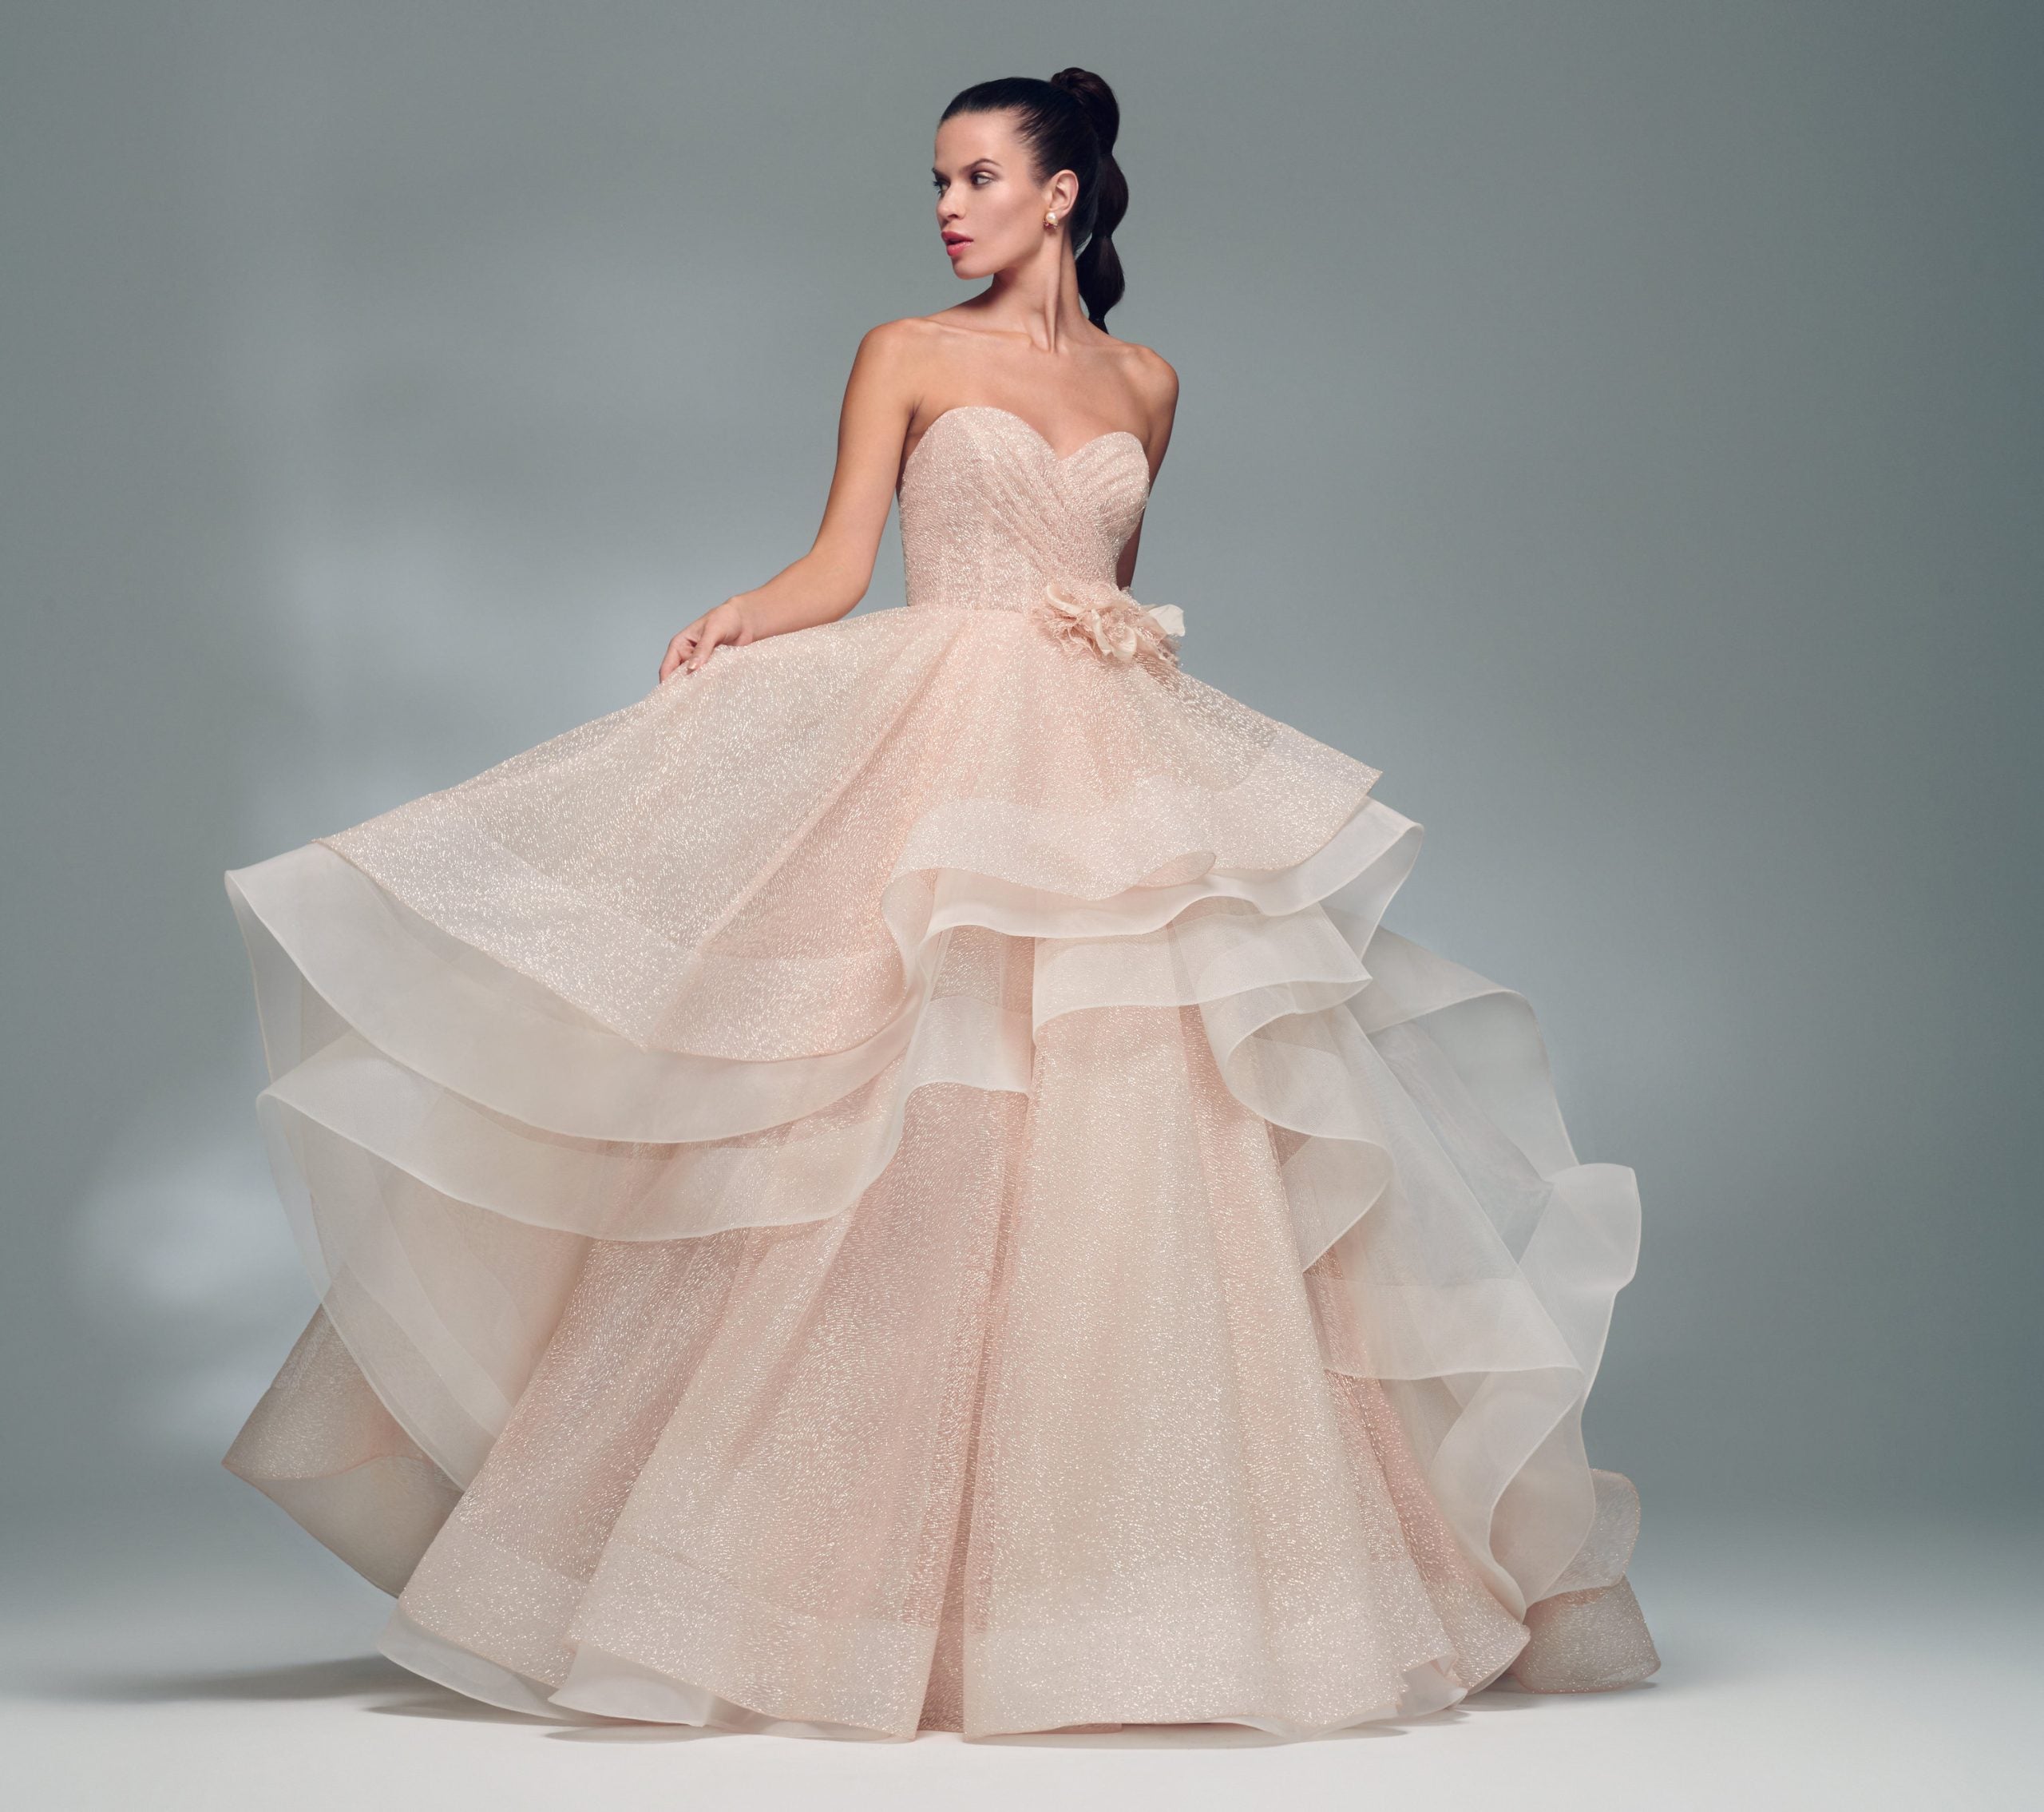 Tulle Ball Gown Dress | vlr.eng.br